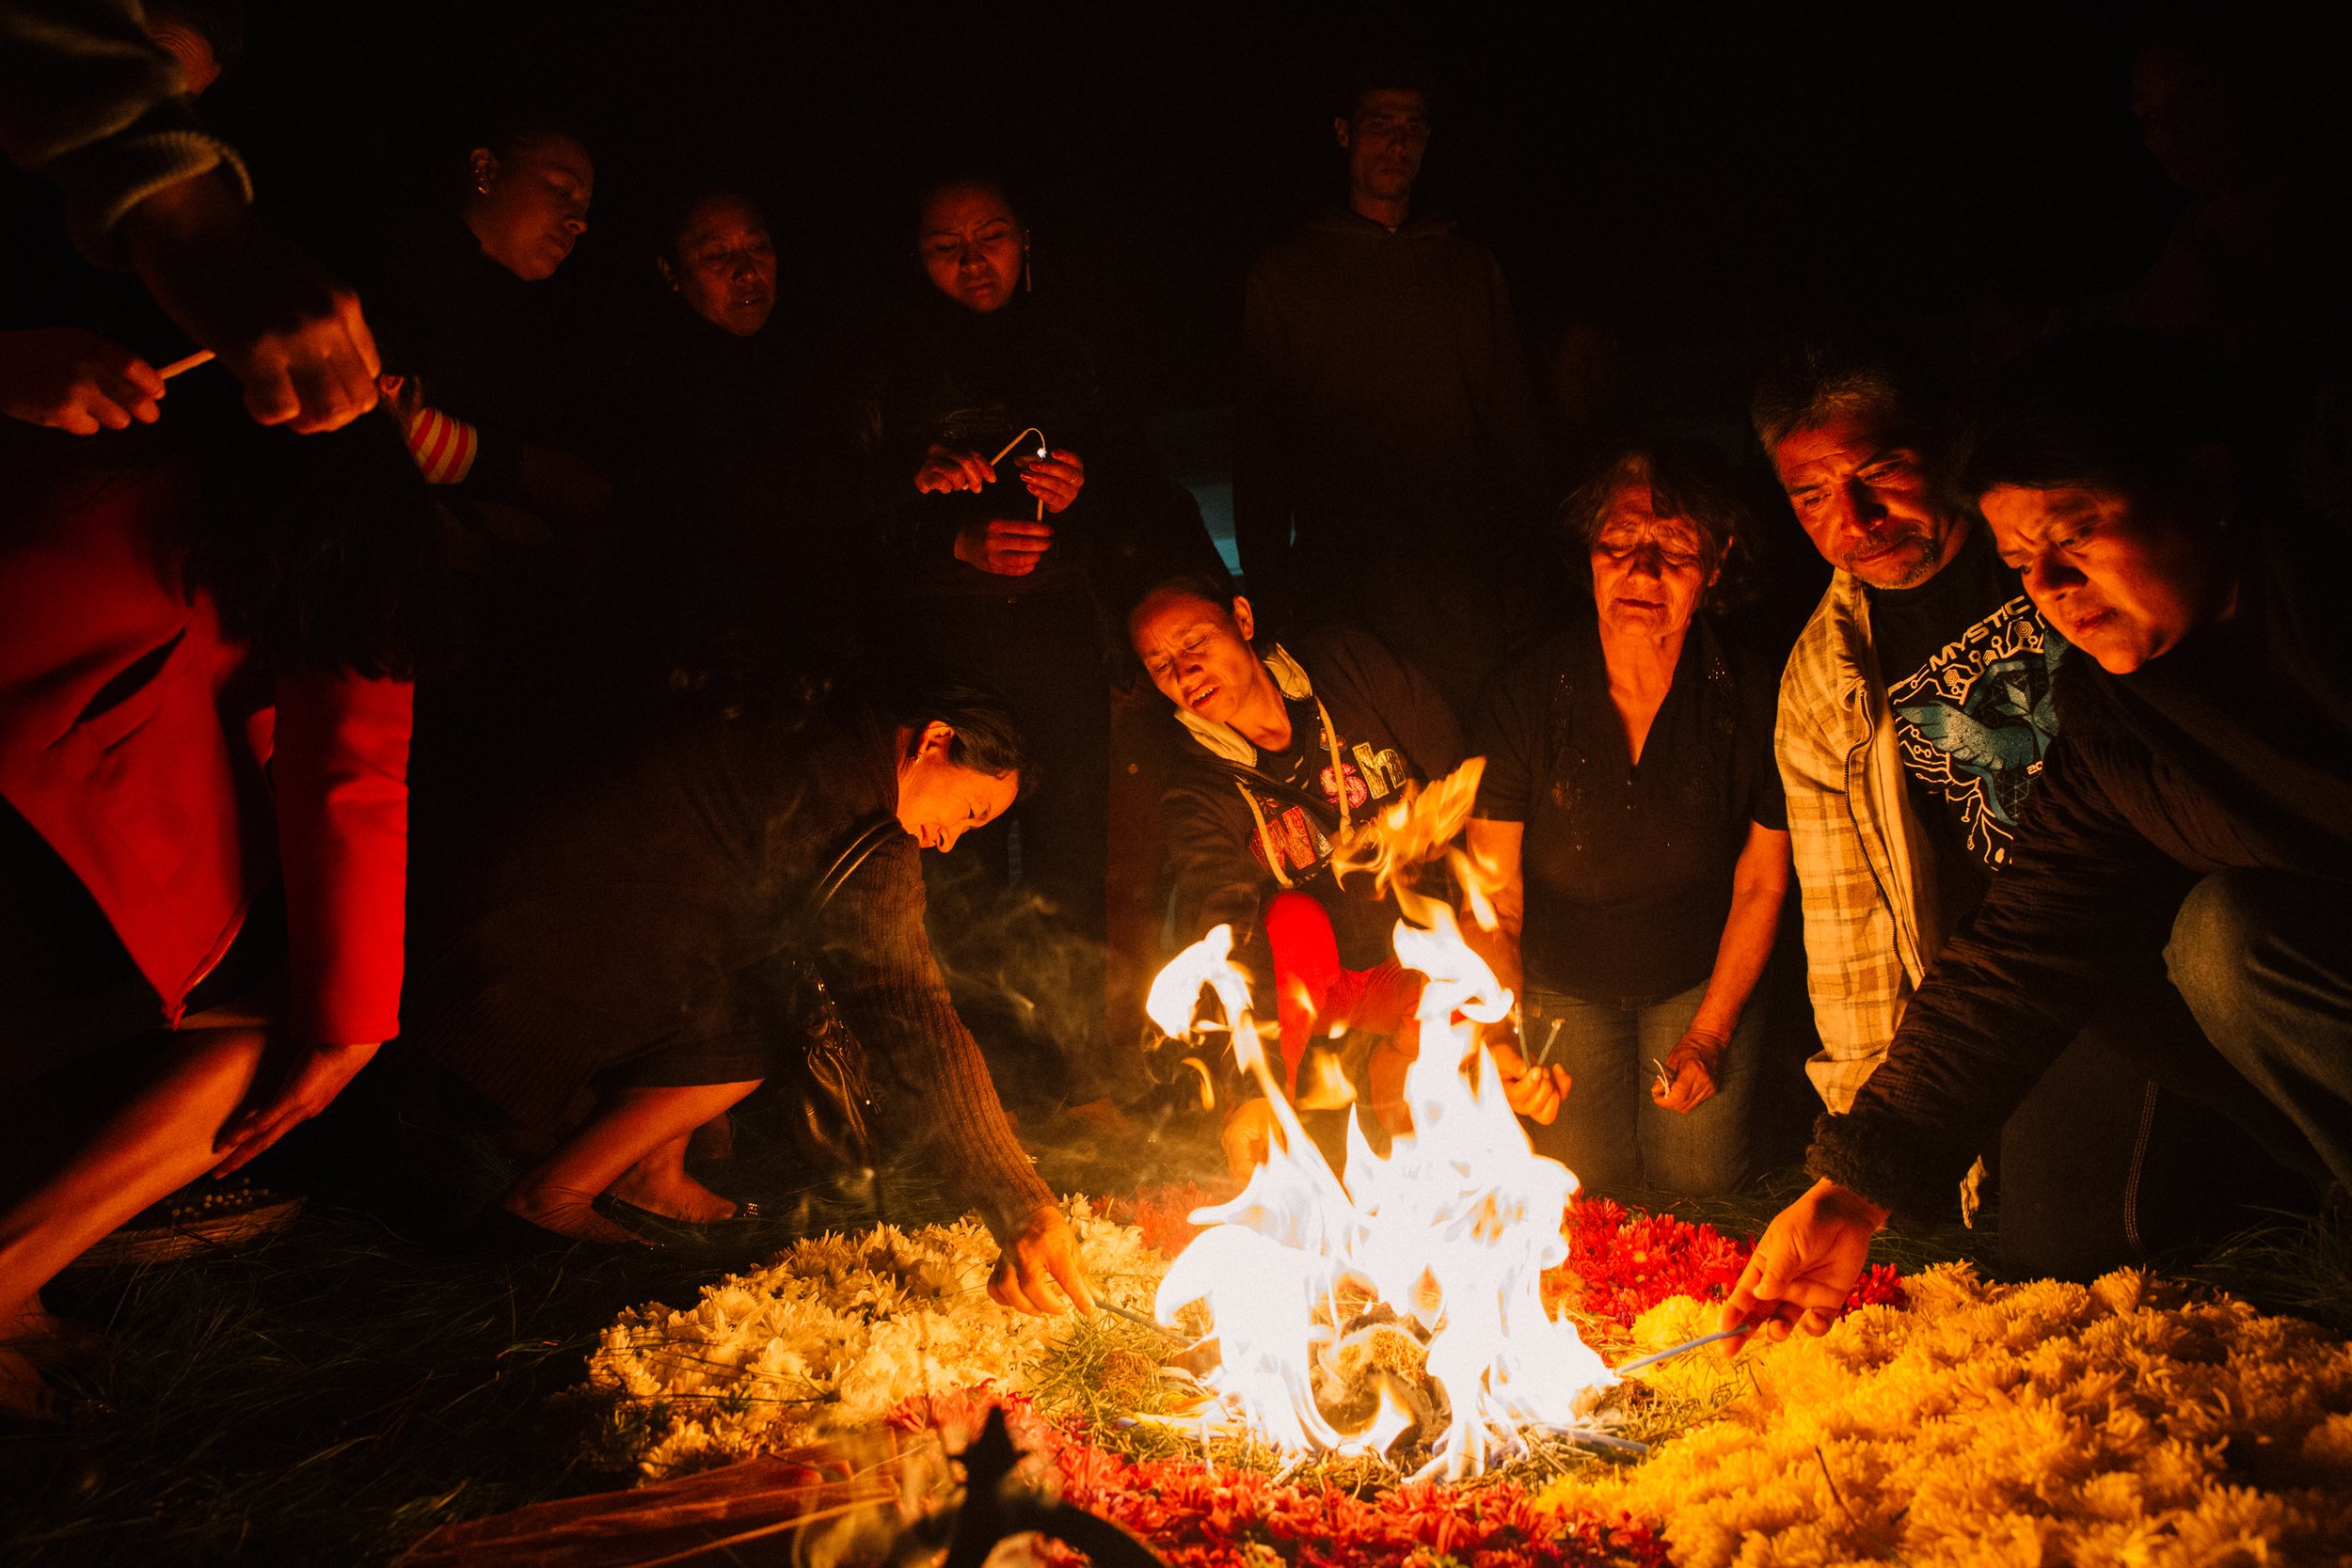  During an ancient Mayan Fire Ceremony held at a migrant shelter in Comitan, Chiapas, Mexico, community members and mothers of the caravan placed offerings in the flame to honor the four grandfathers, Kan, Tzi', Ajmaq, and Ajpu'. The mothers call upo